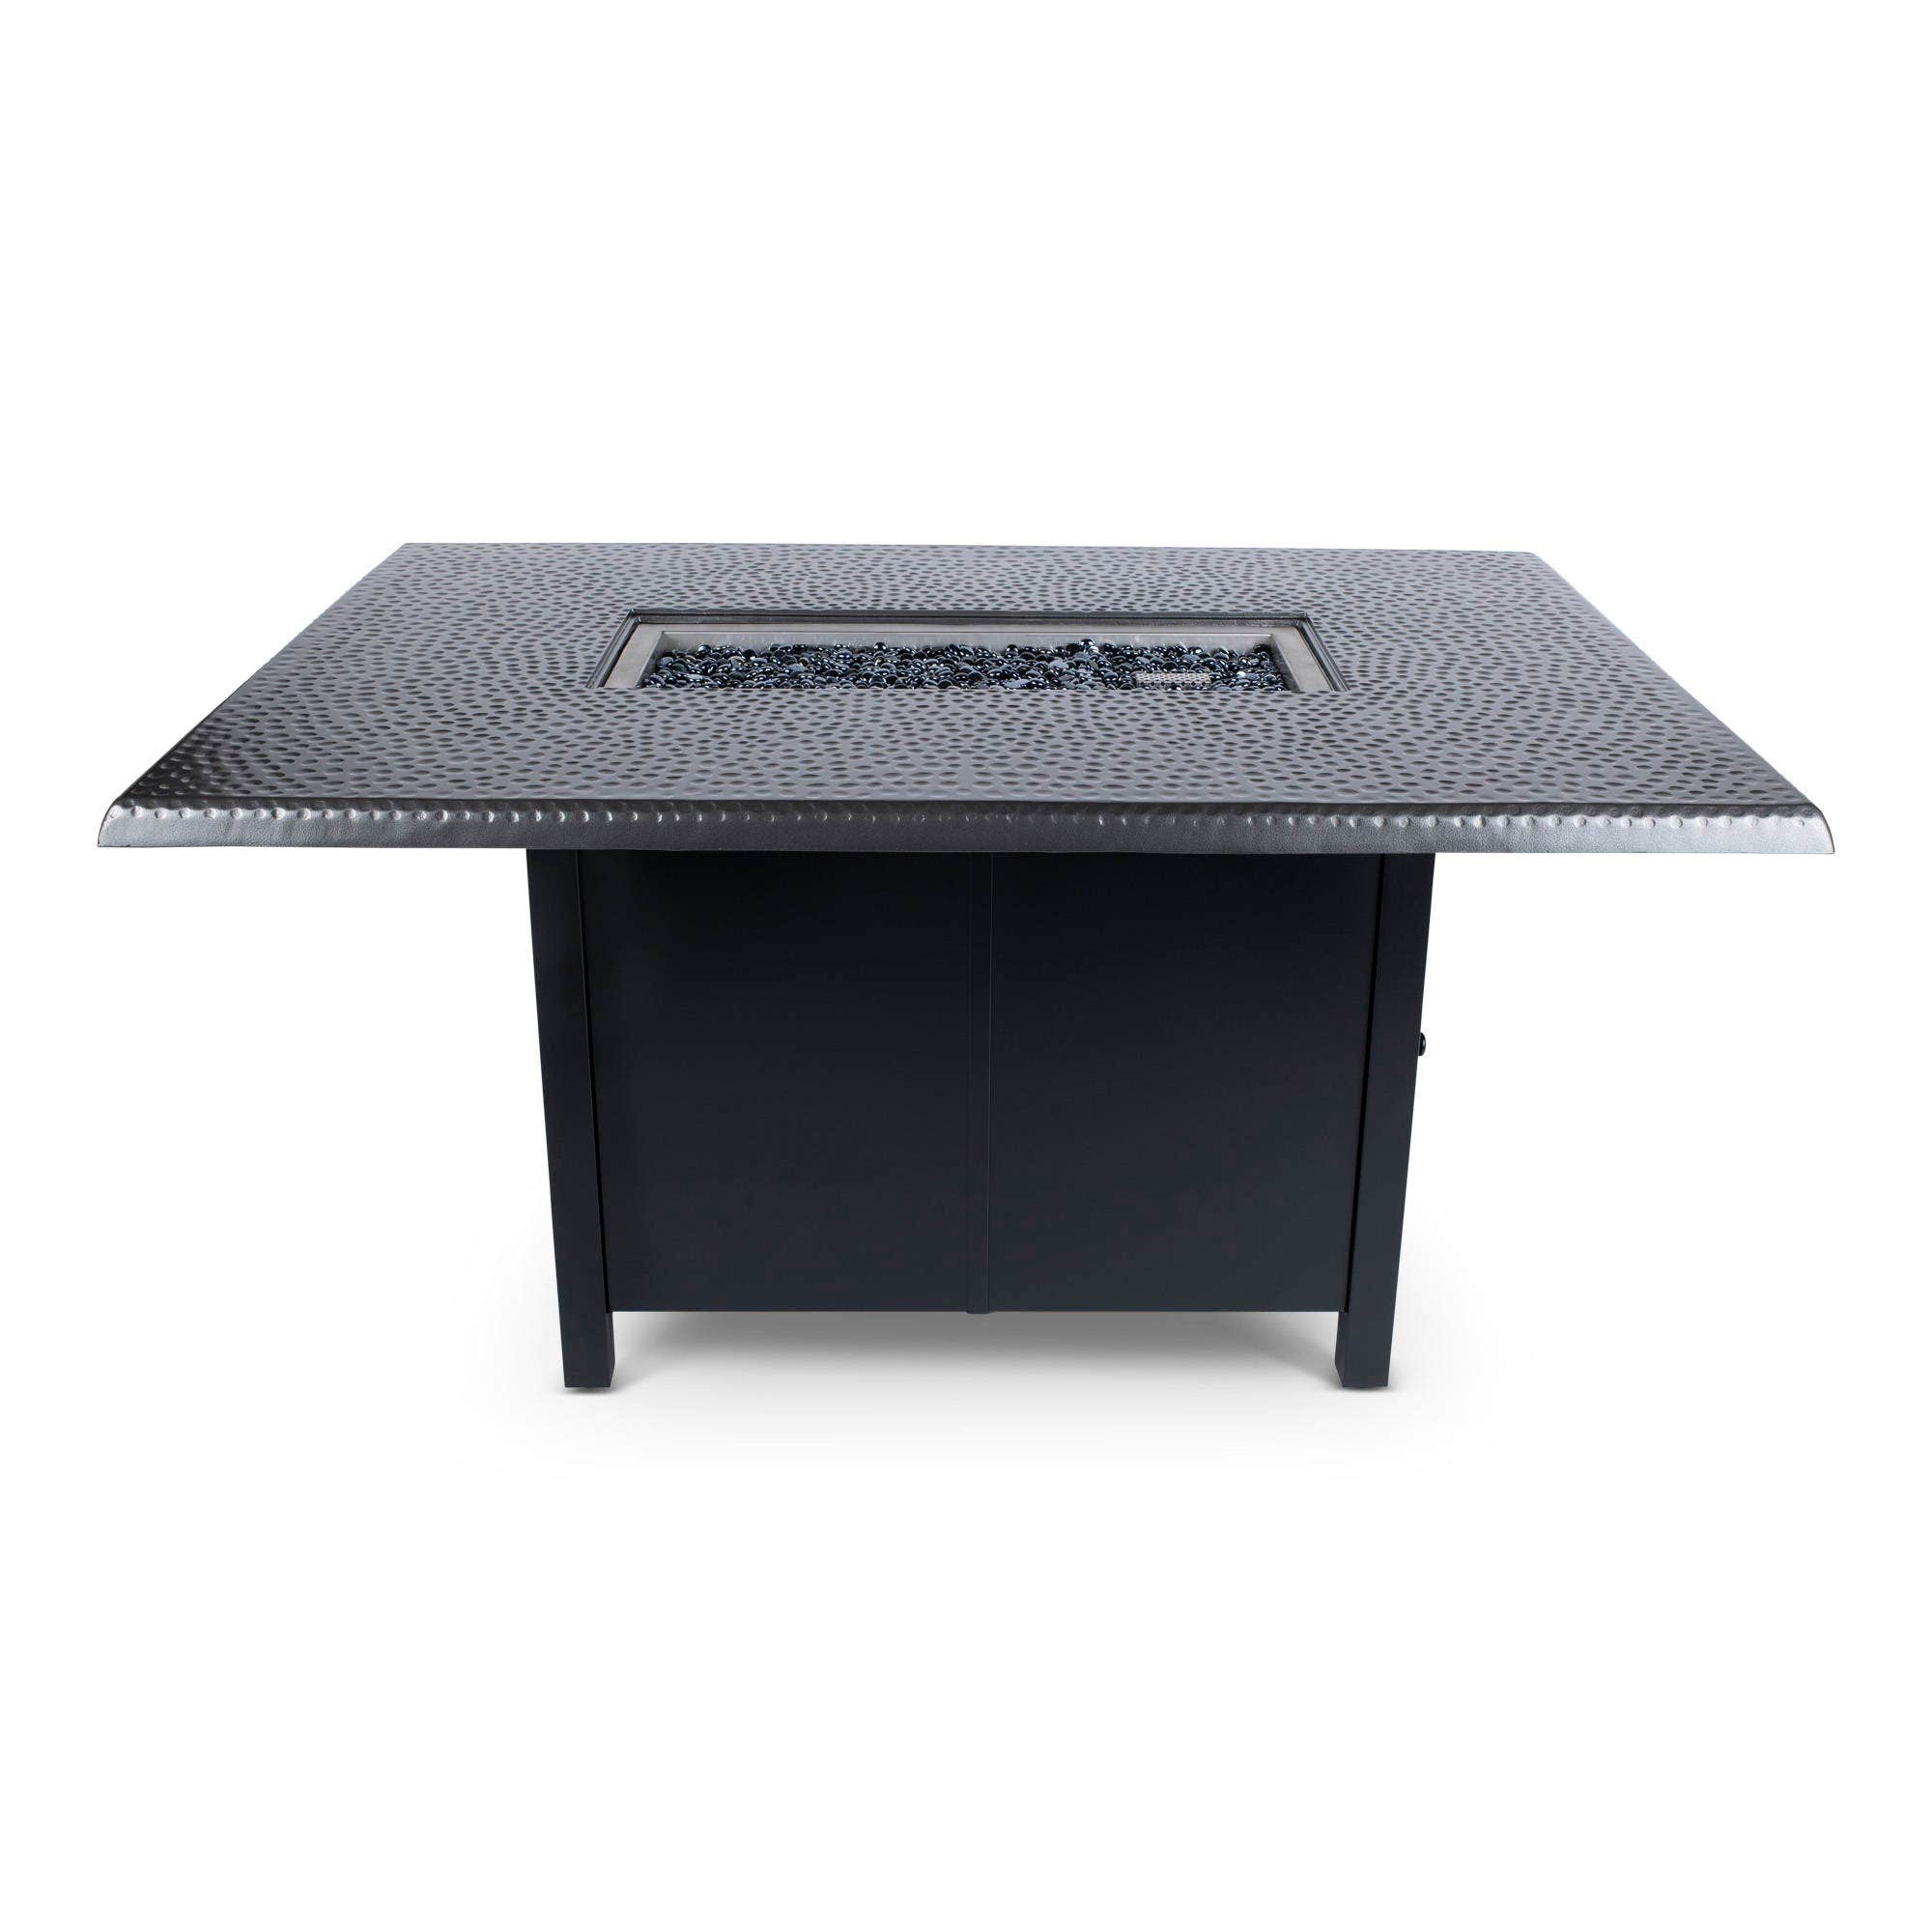 Woodard 42 inch x 60 inch Rectangular Dining Fire Table with Pewter Hammered Top and Black Base 12037581